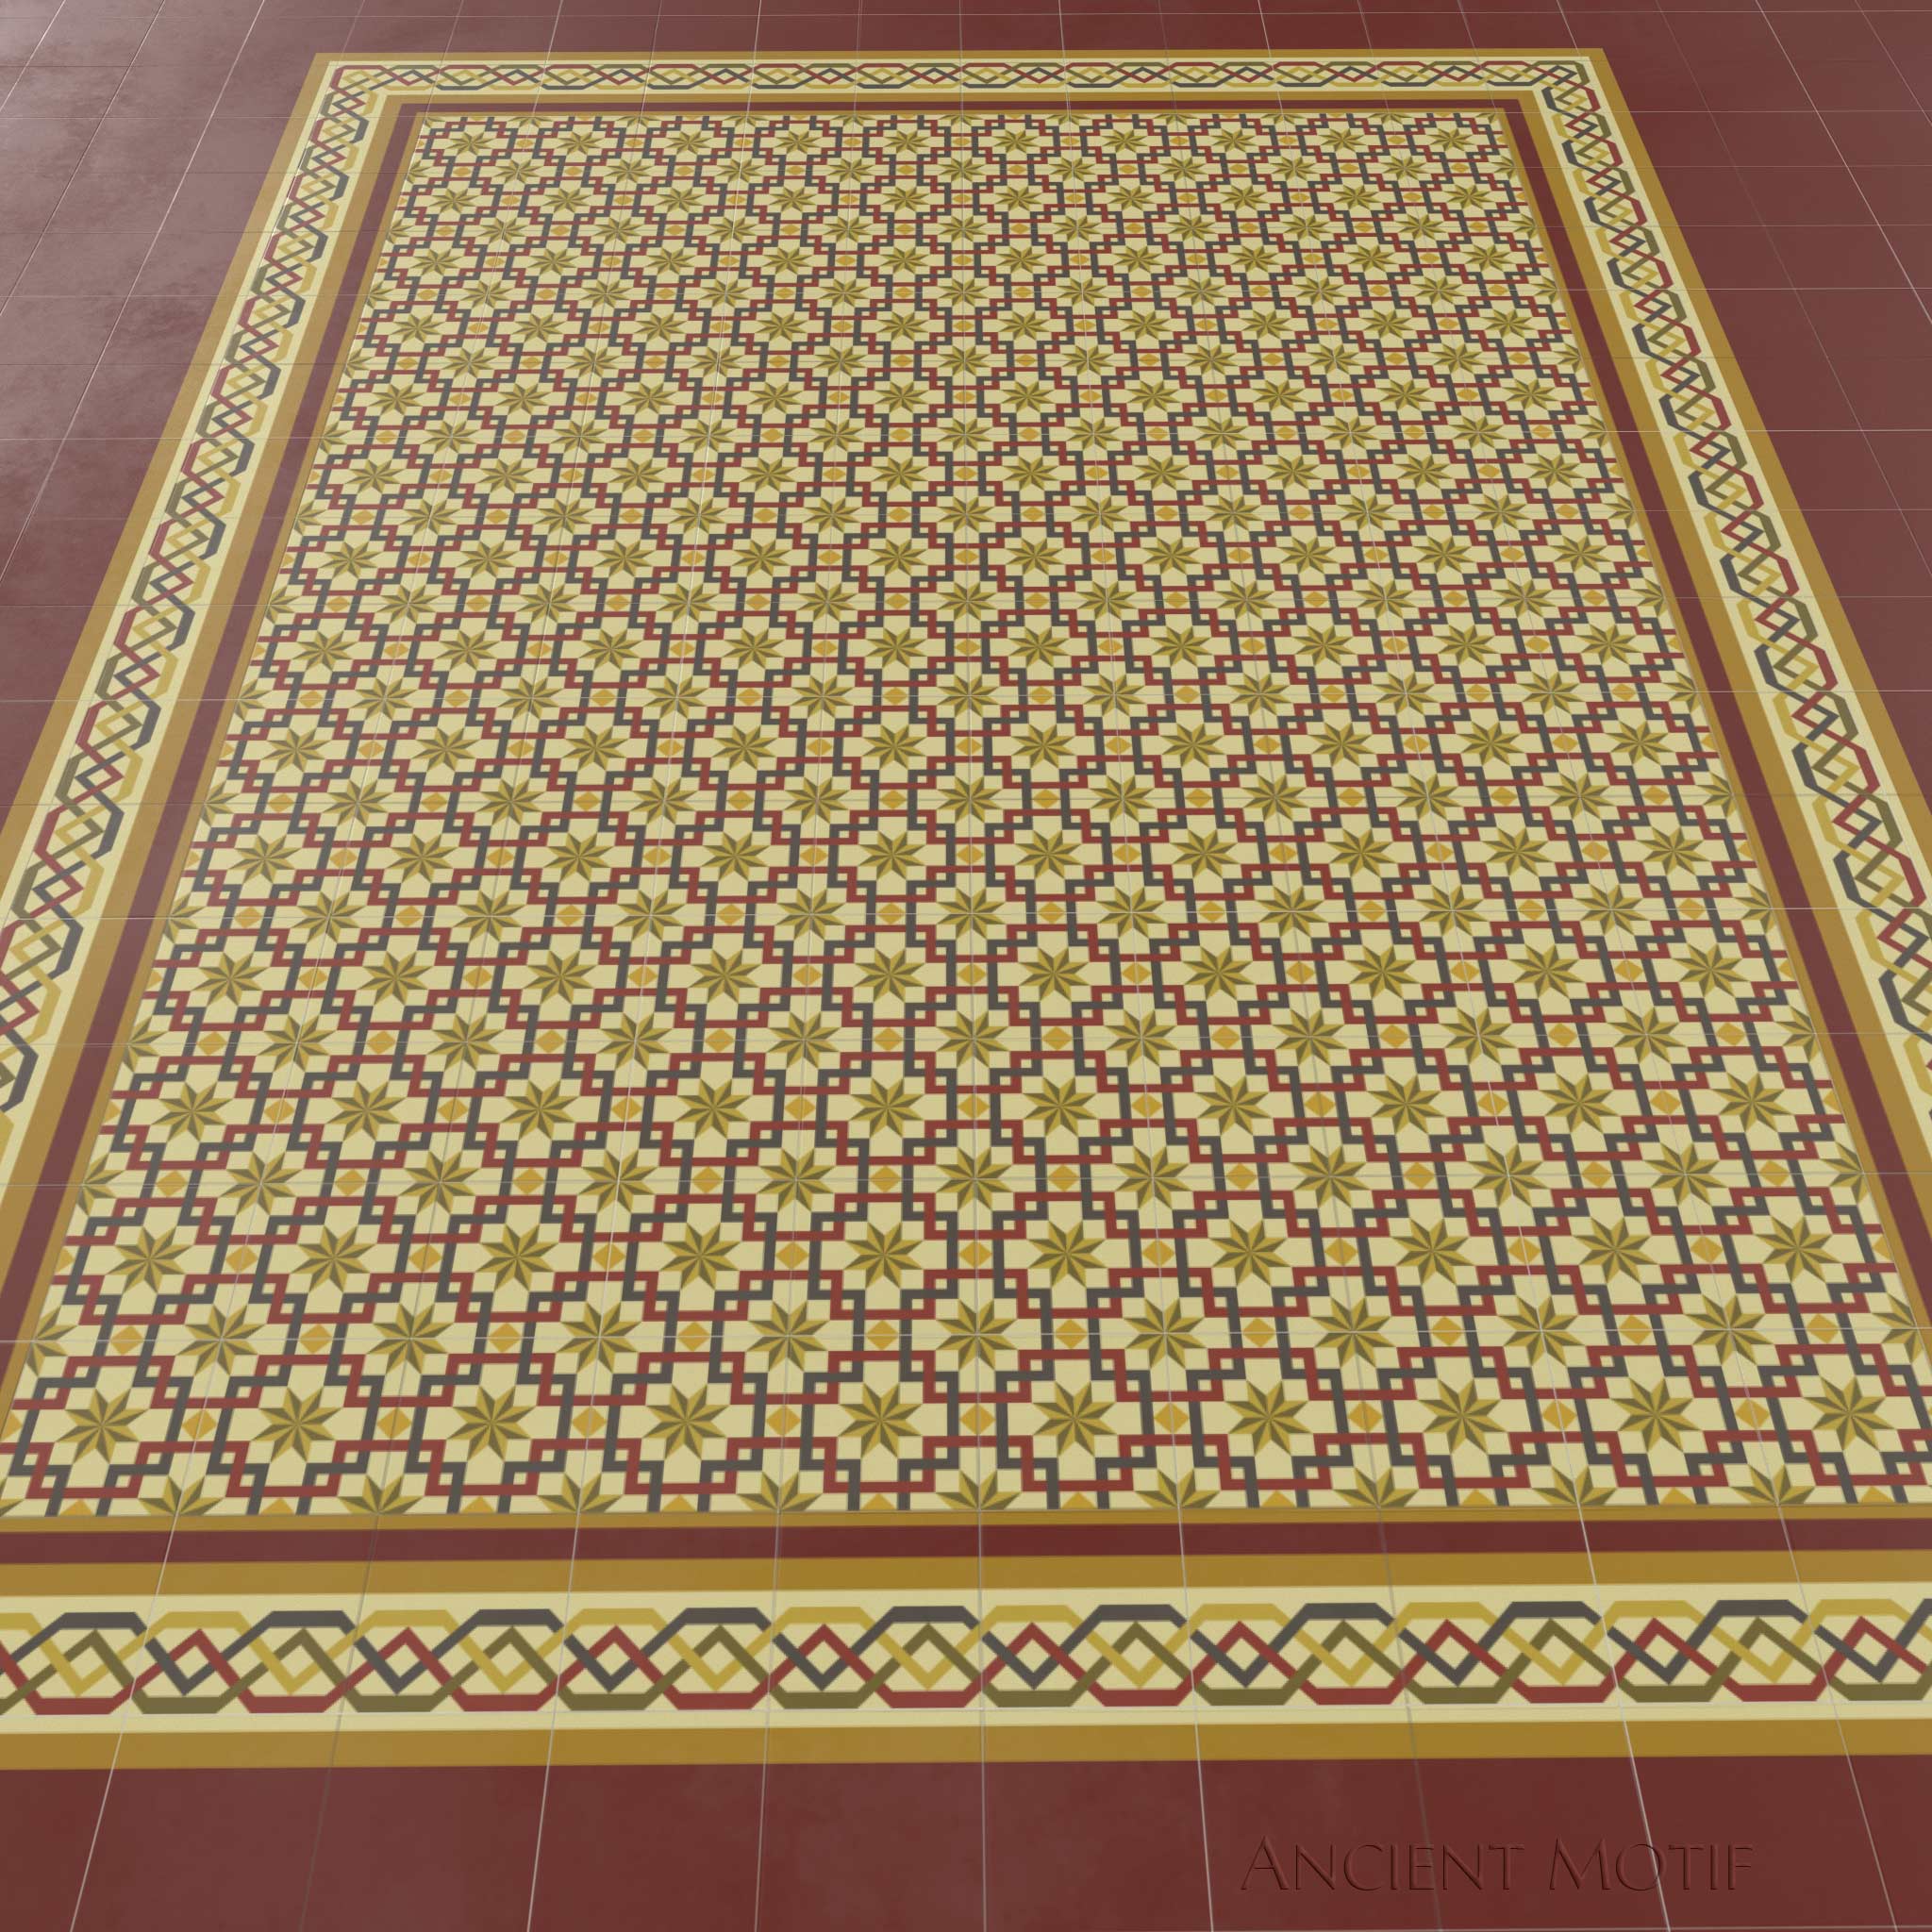 Andalusia Encaustic Cement Tile Floor in Burgundy, Goldenrod and Olive